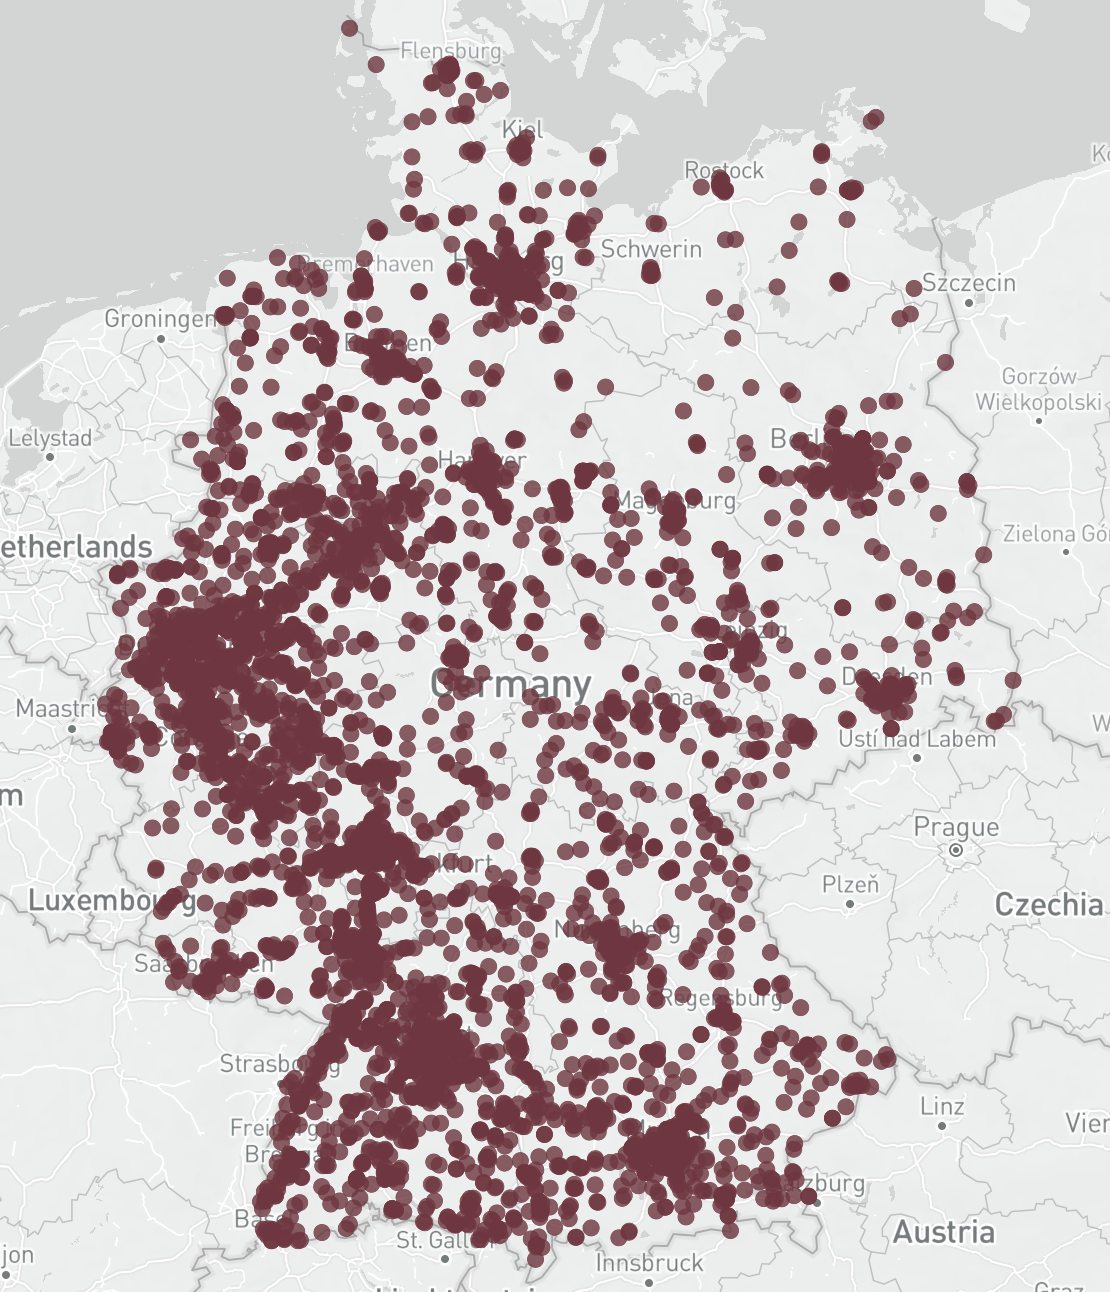 largest companies in germany on map